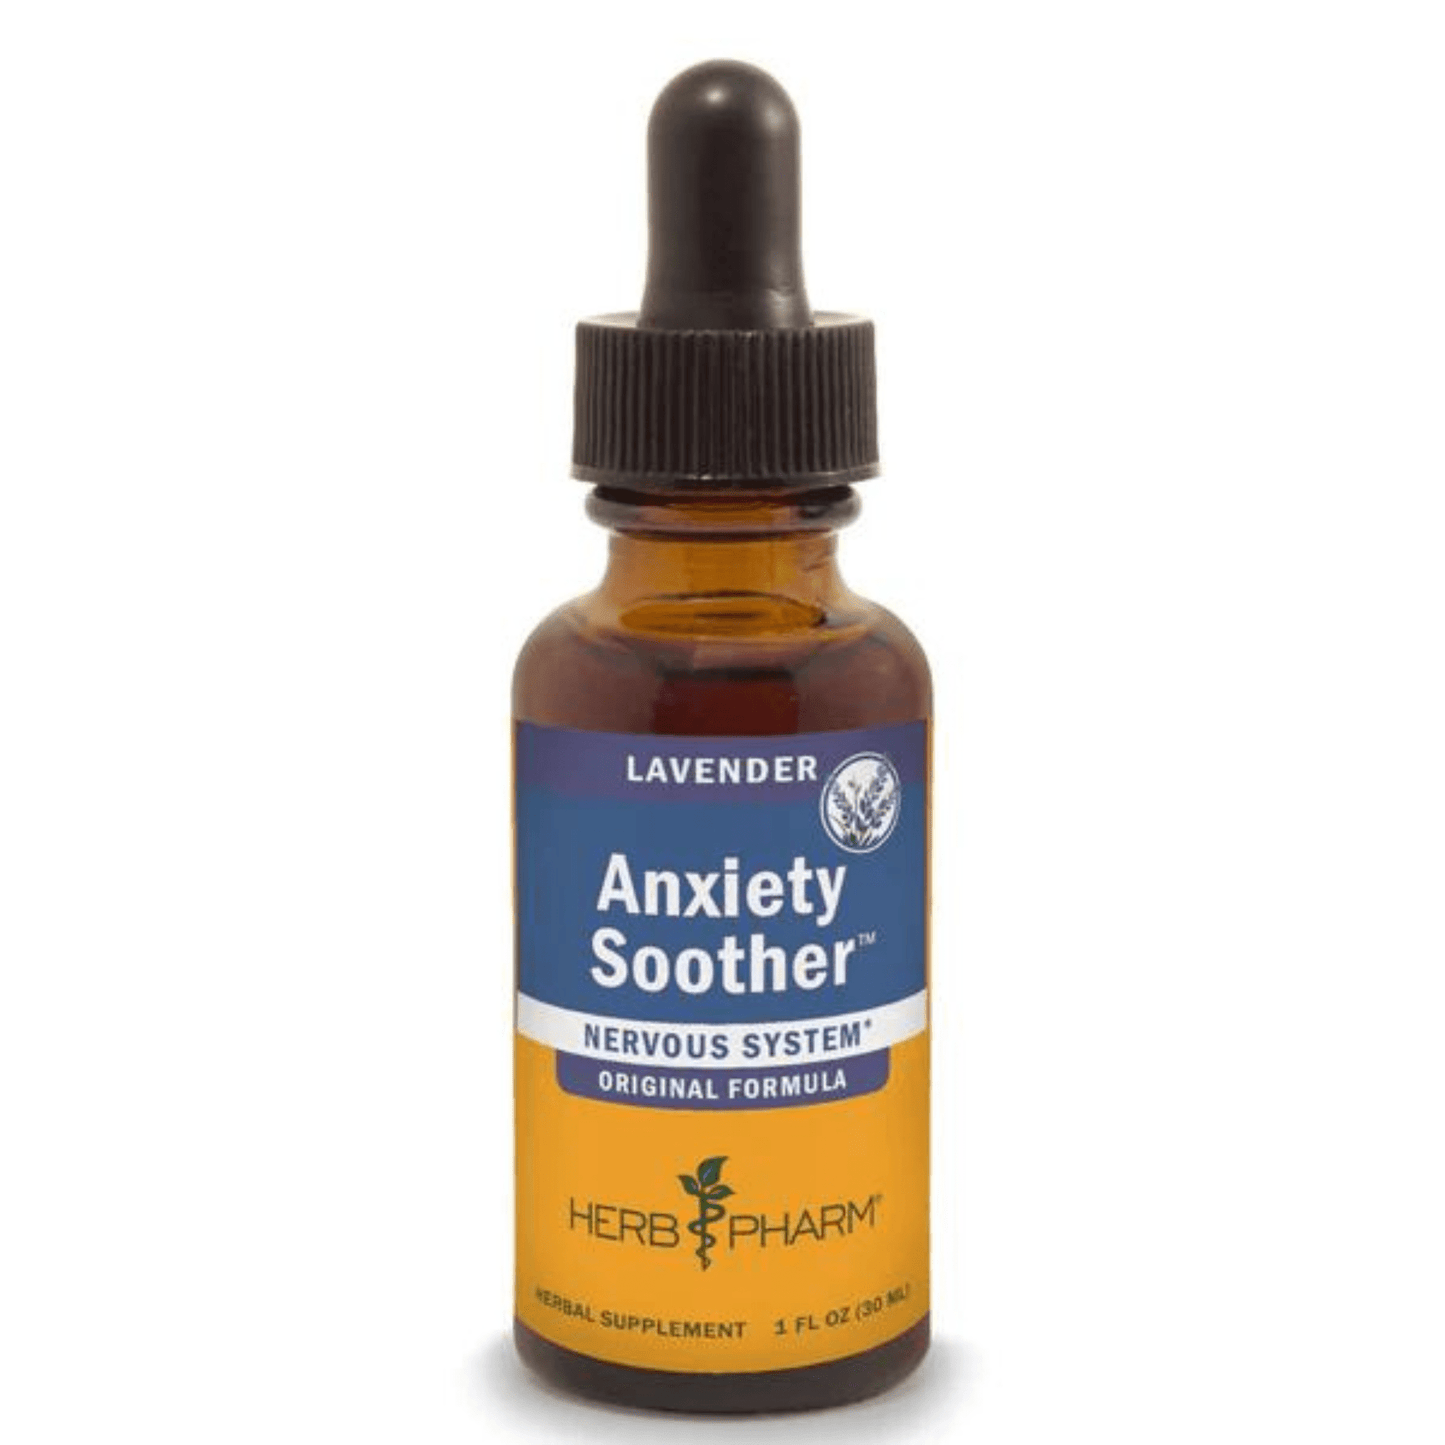 Primary Image of Anxiety Soother Lavender